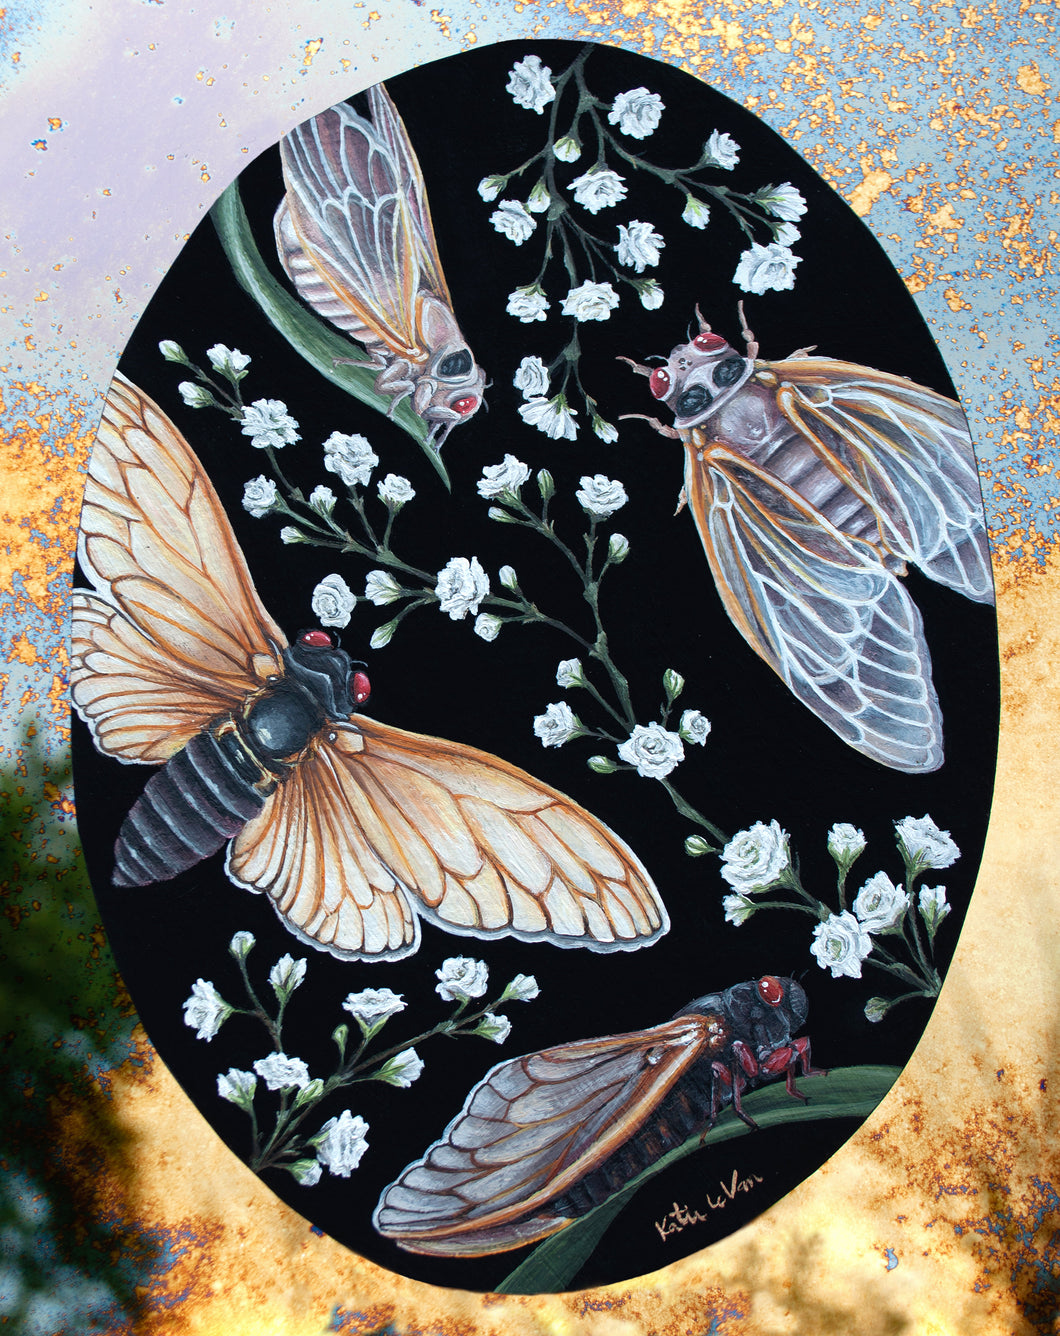 Giclee print of Cicada Life Cycle artwork - gypsophila flowers and black oval background